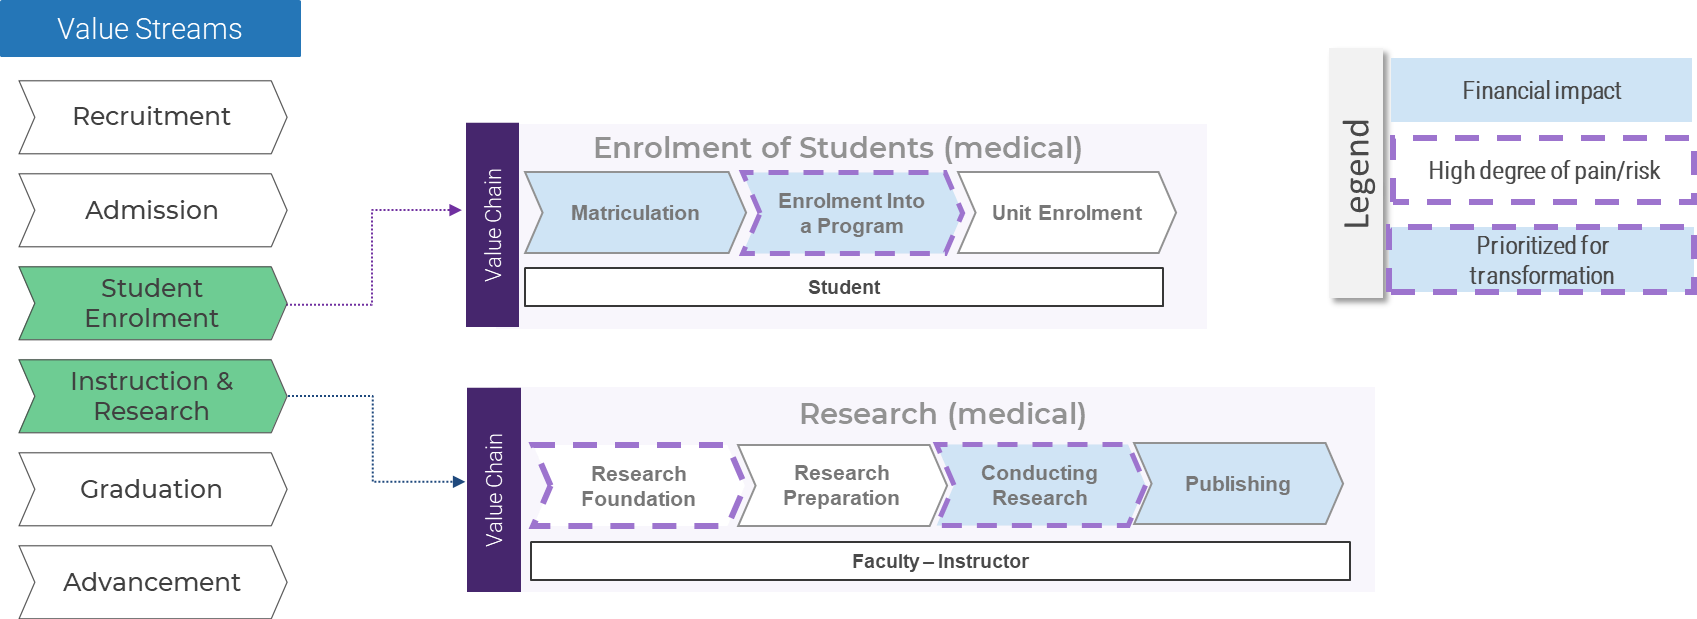 this image depicts the same value chains as the image above, with a legend showing which steps have a financial impact, which steps have a high degree of risk, and which steps are prioritized for transformation. Matriculation and publishing are shown to have a financial impact. Research foundation is shown to have a high degree of risk, and enrollment into a program and conducting research are prioritized for transformation.